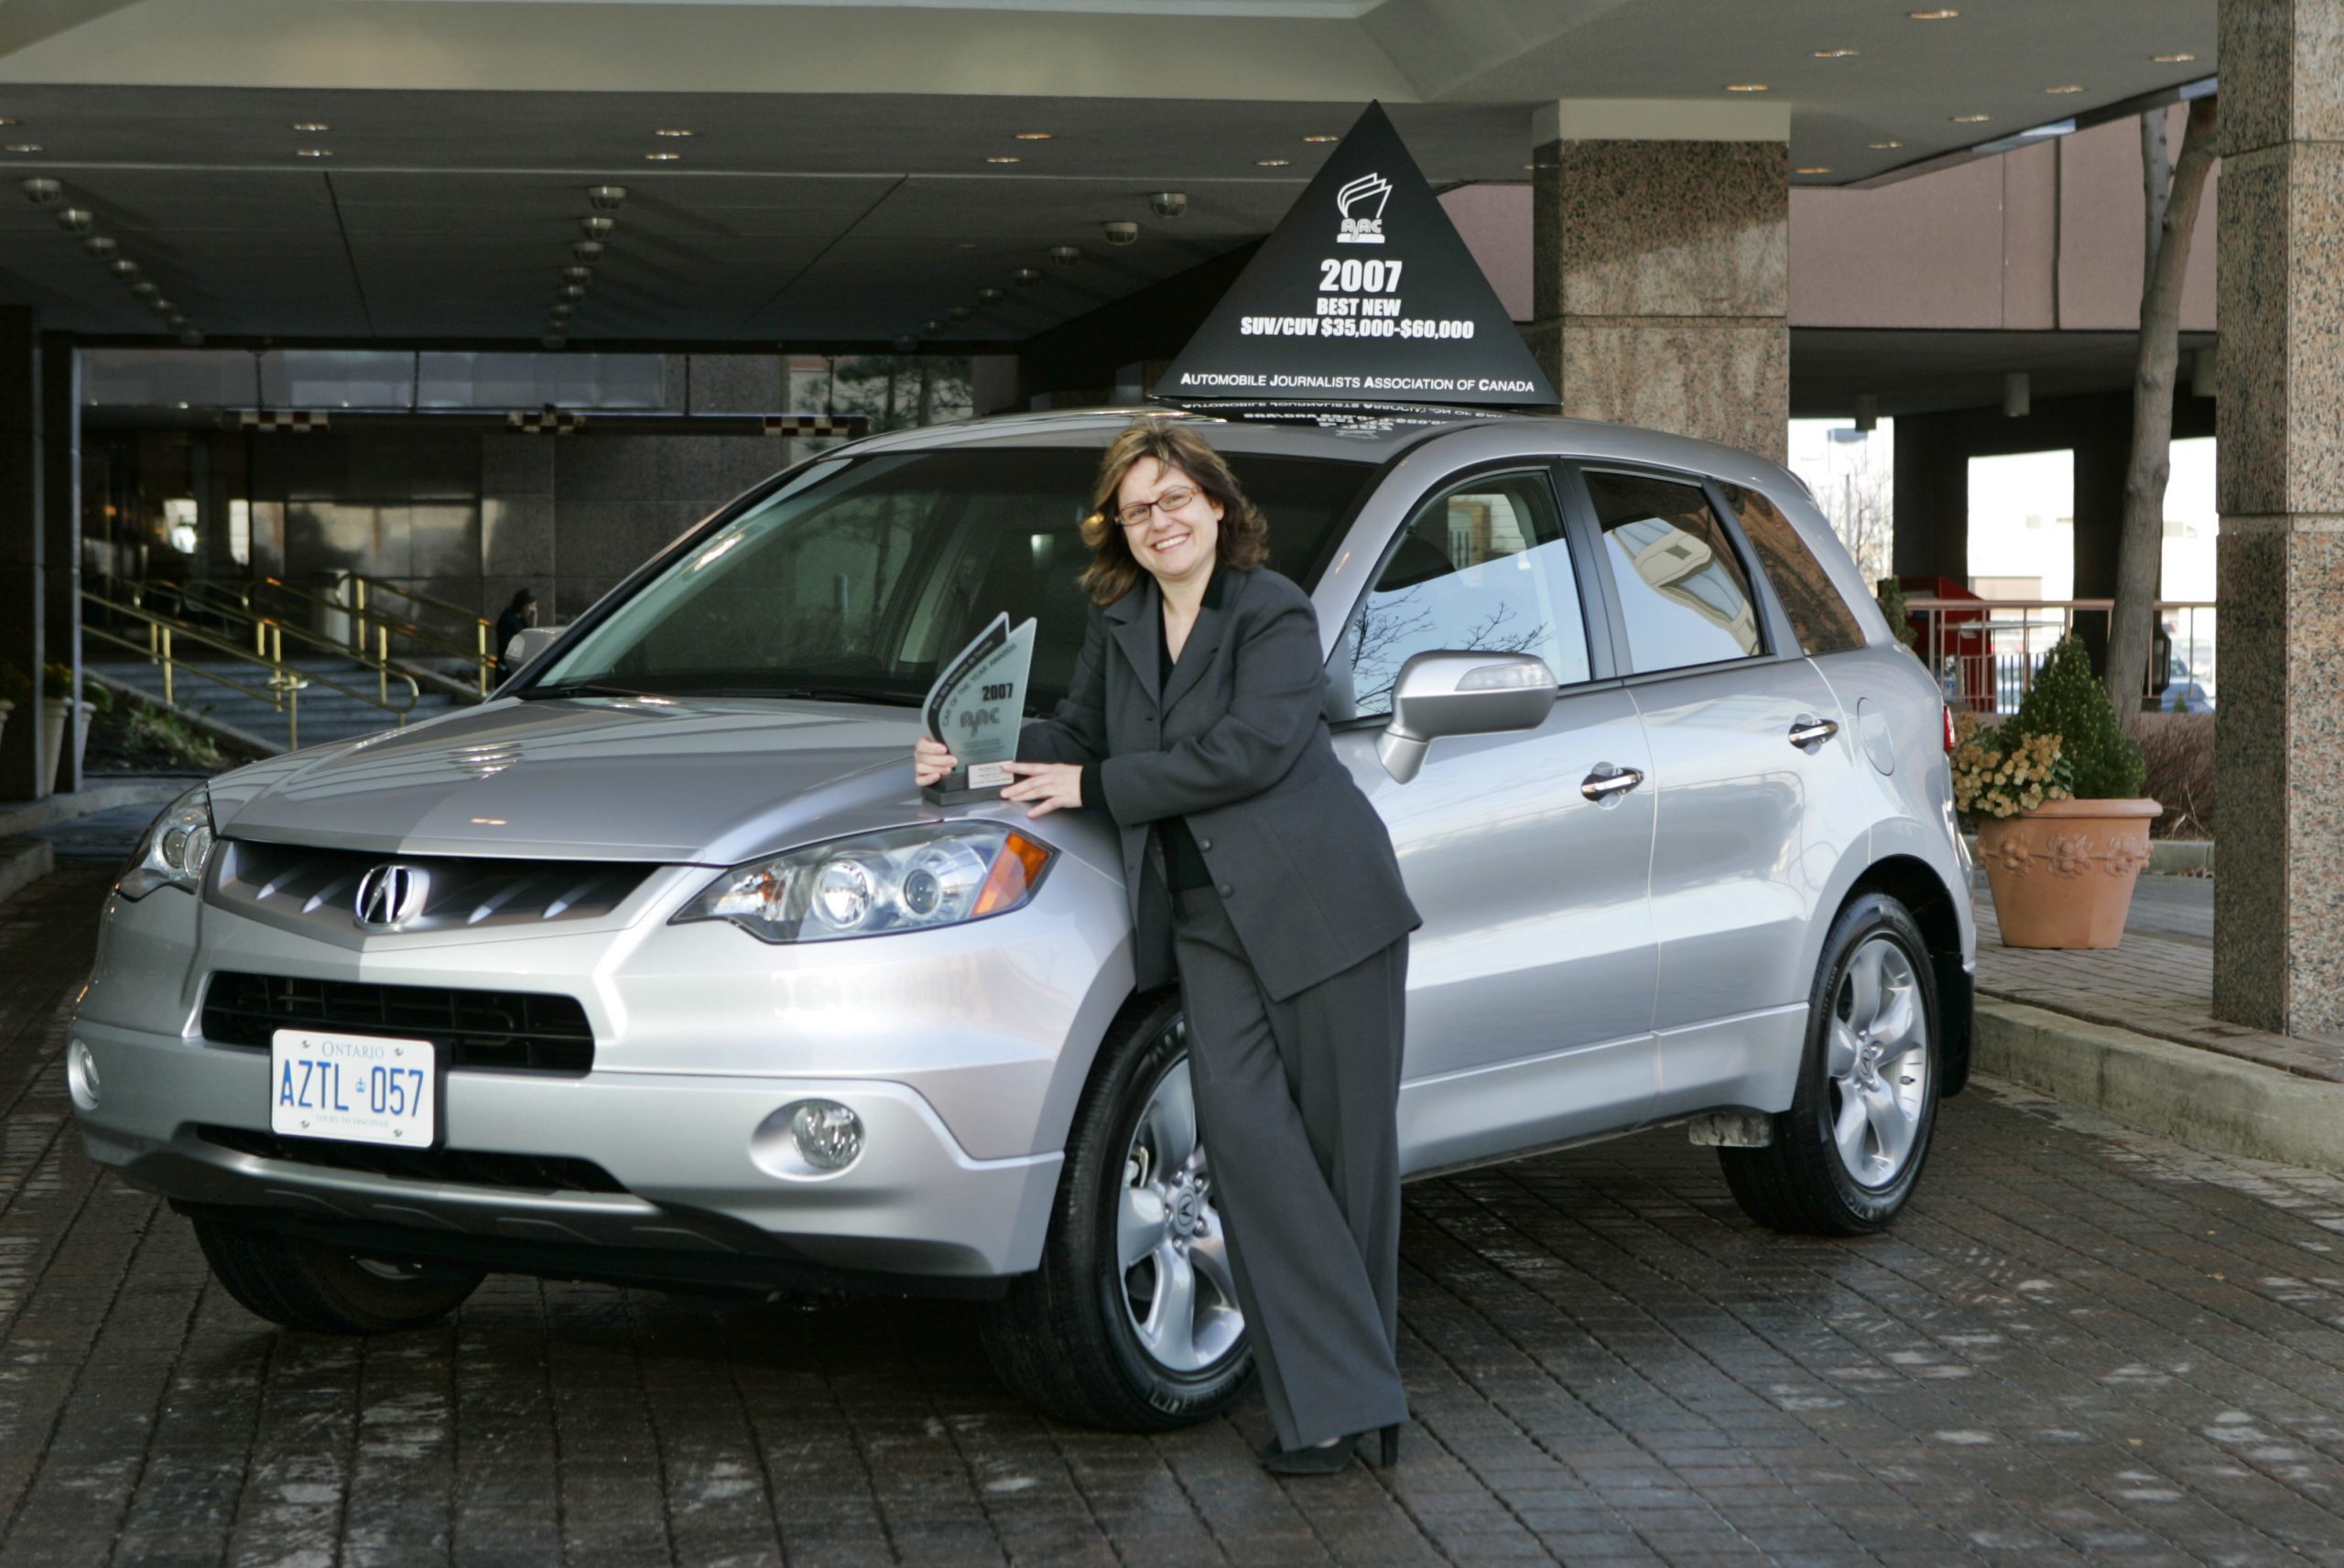 A woman posing next to a parked Acura RDX